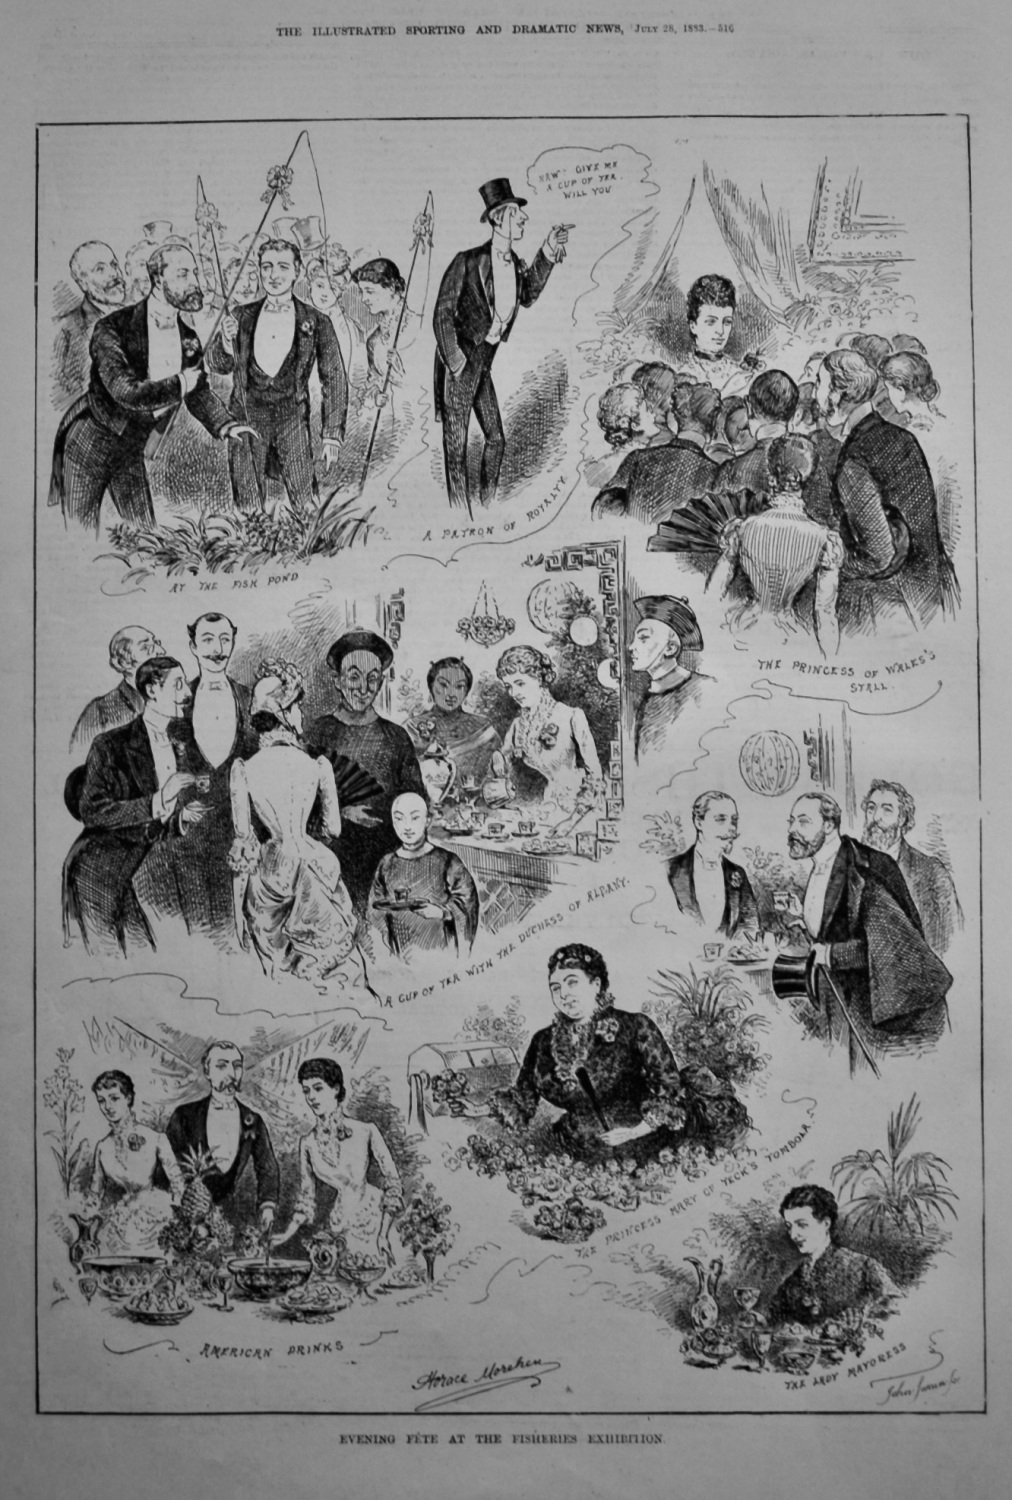 Evening Fete at the Fisheries Exhibition.  1883.